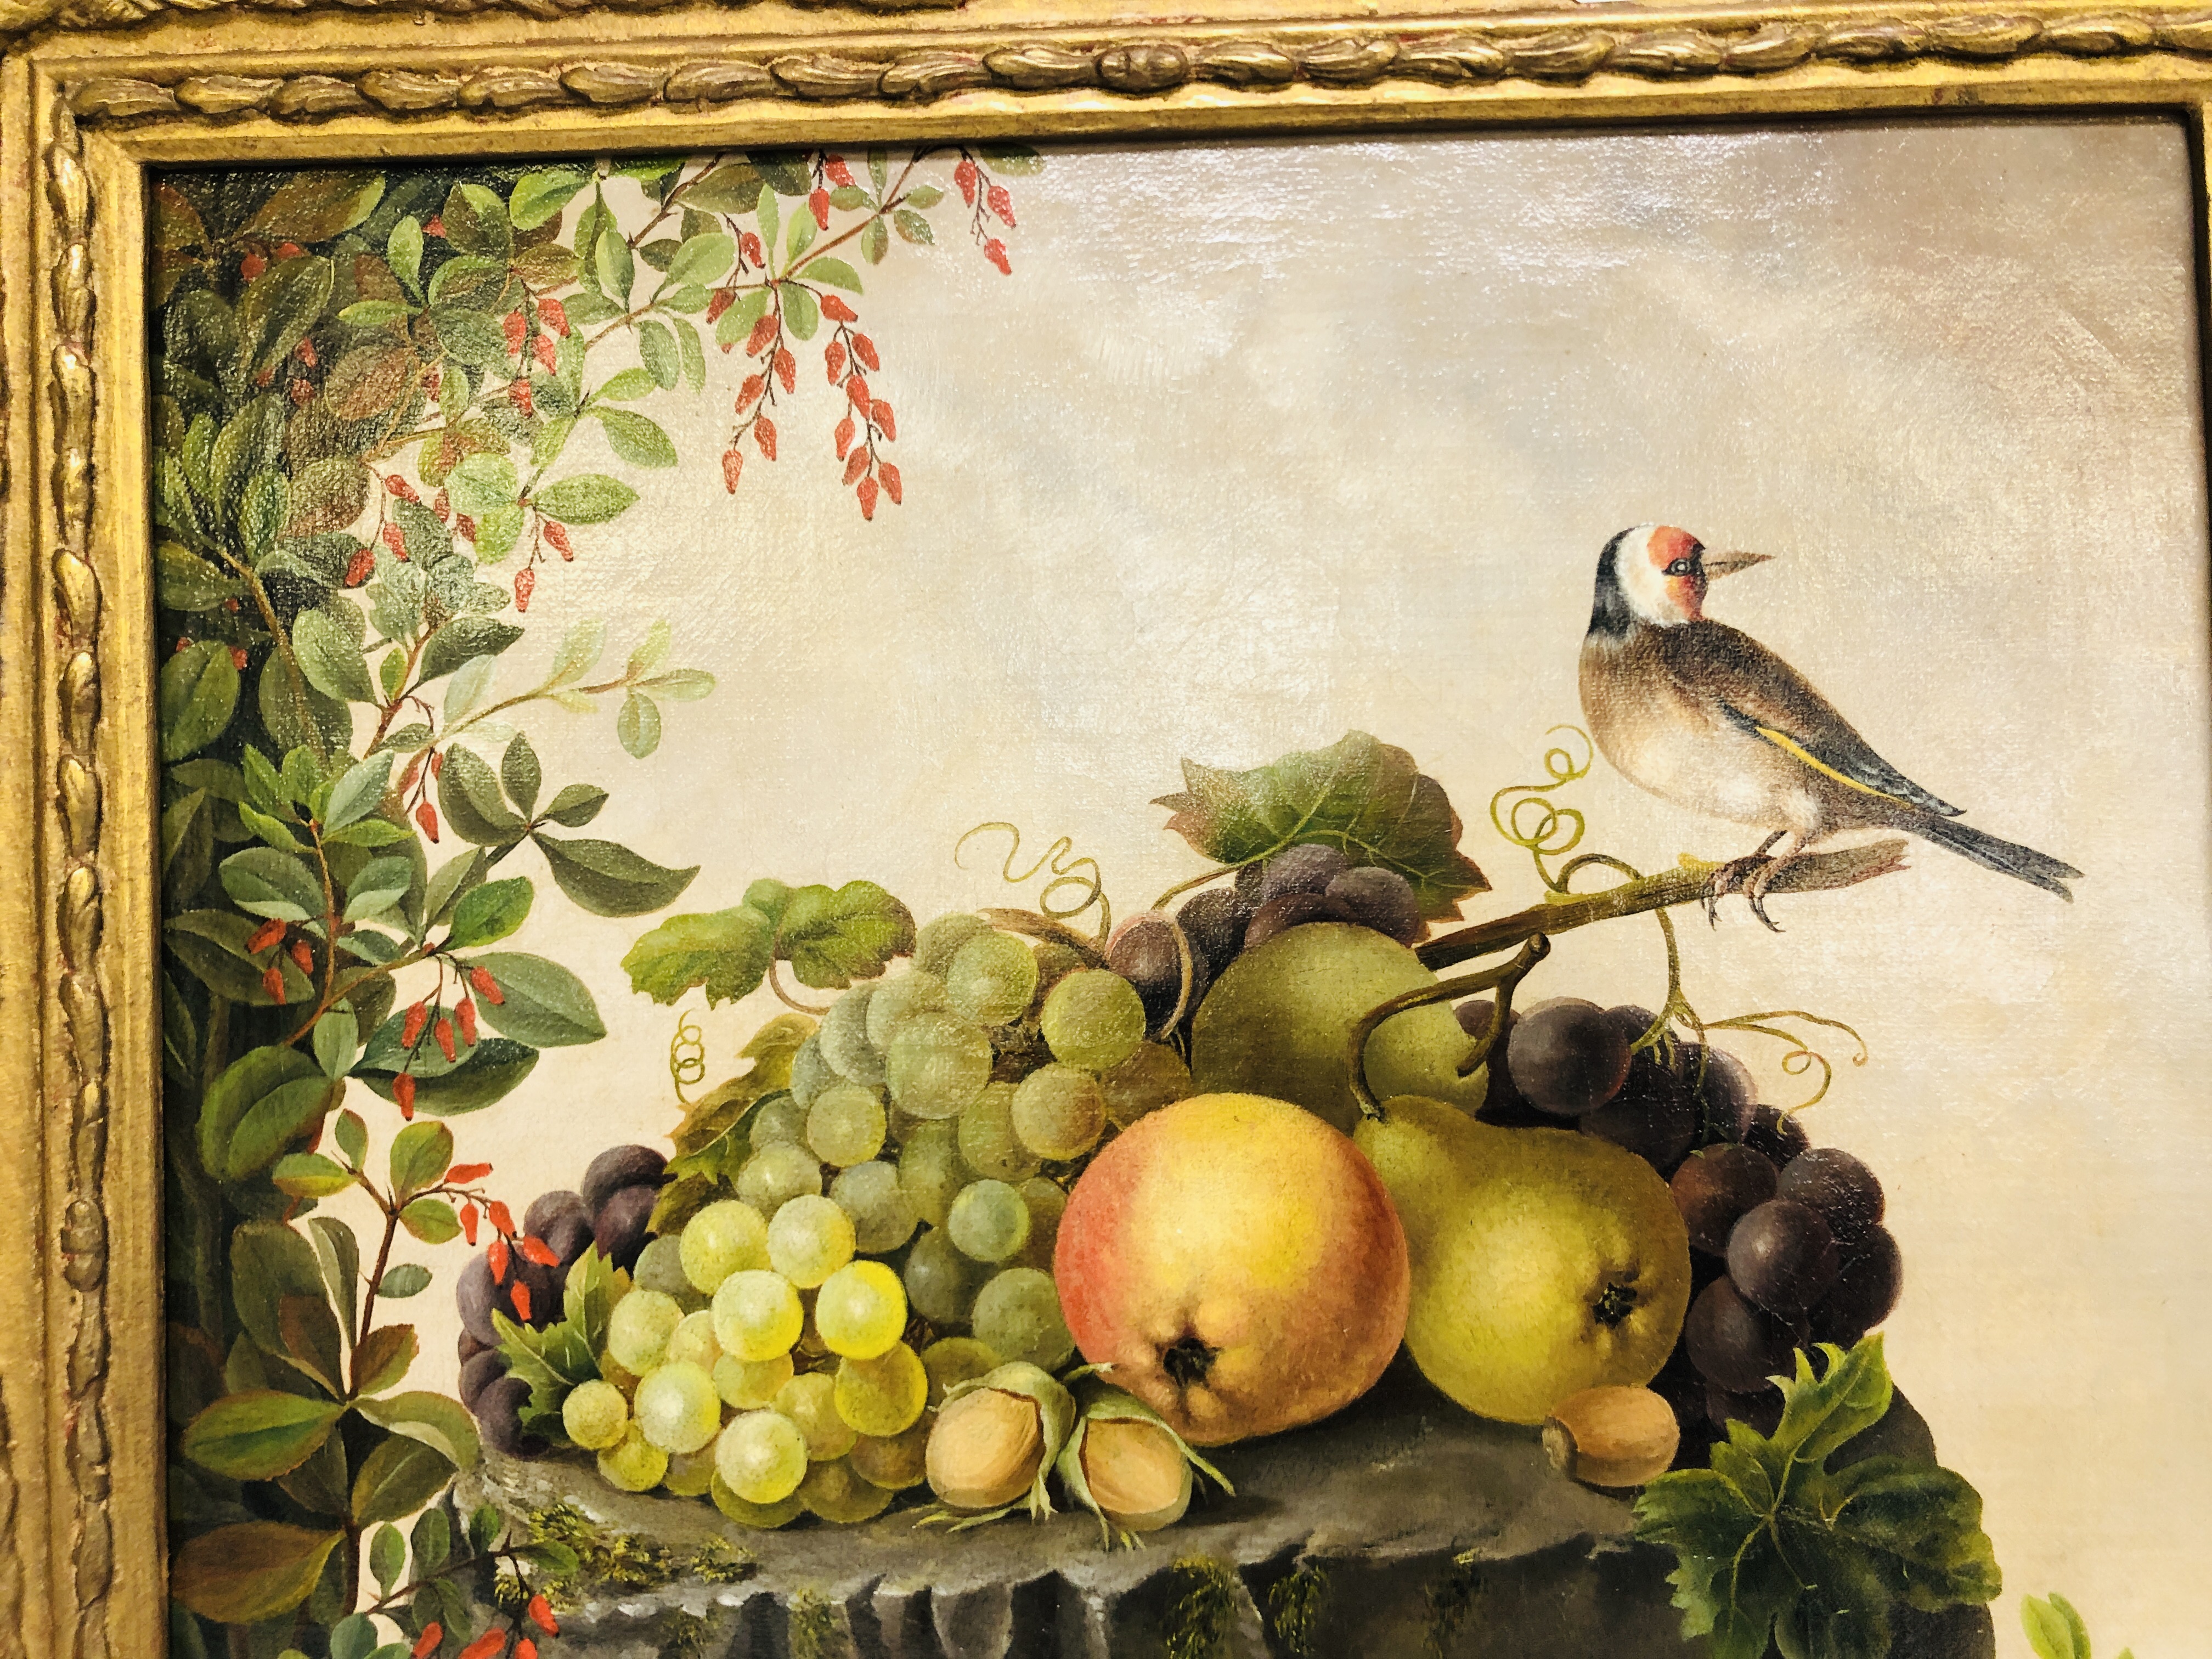 ENGLISH SCHOOL CIRCA 1900 "STILL LIFE WITH FRUIT AND FINCH", OIL ON CANVAS 36 X 35CM. - Image 2 of 6